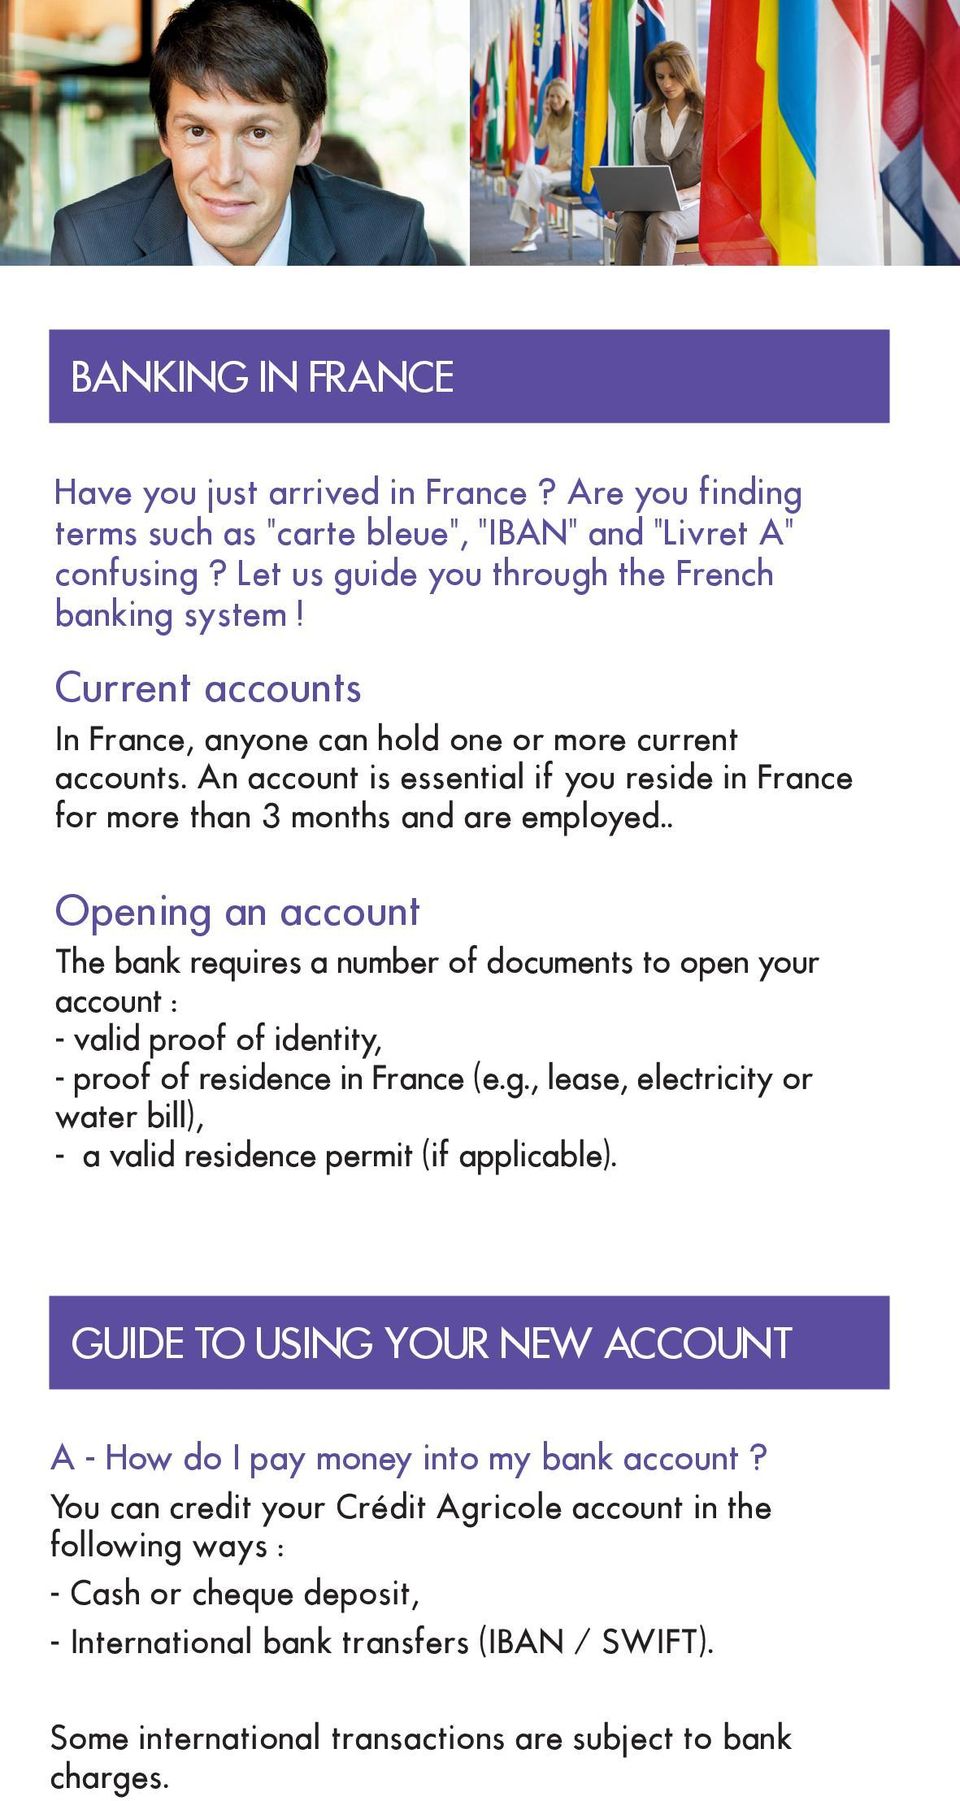 Current In France, accounts anyone can hold one or In France, more anyone current can hold accounts.